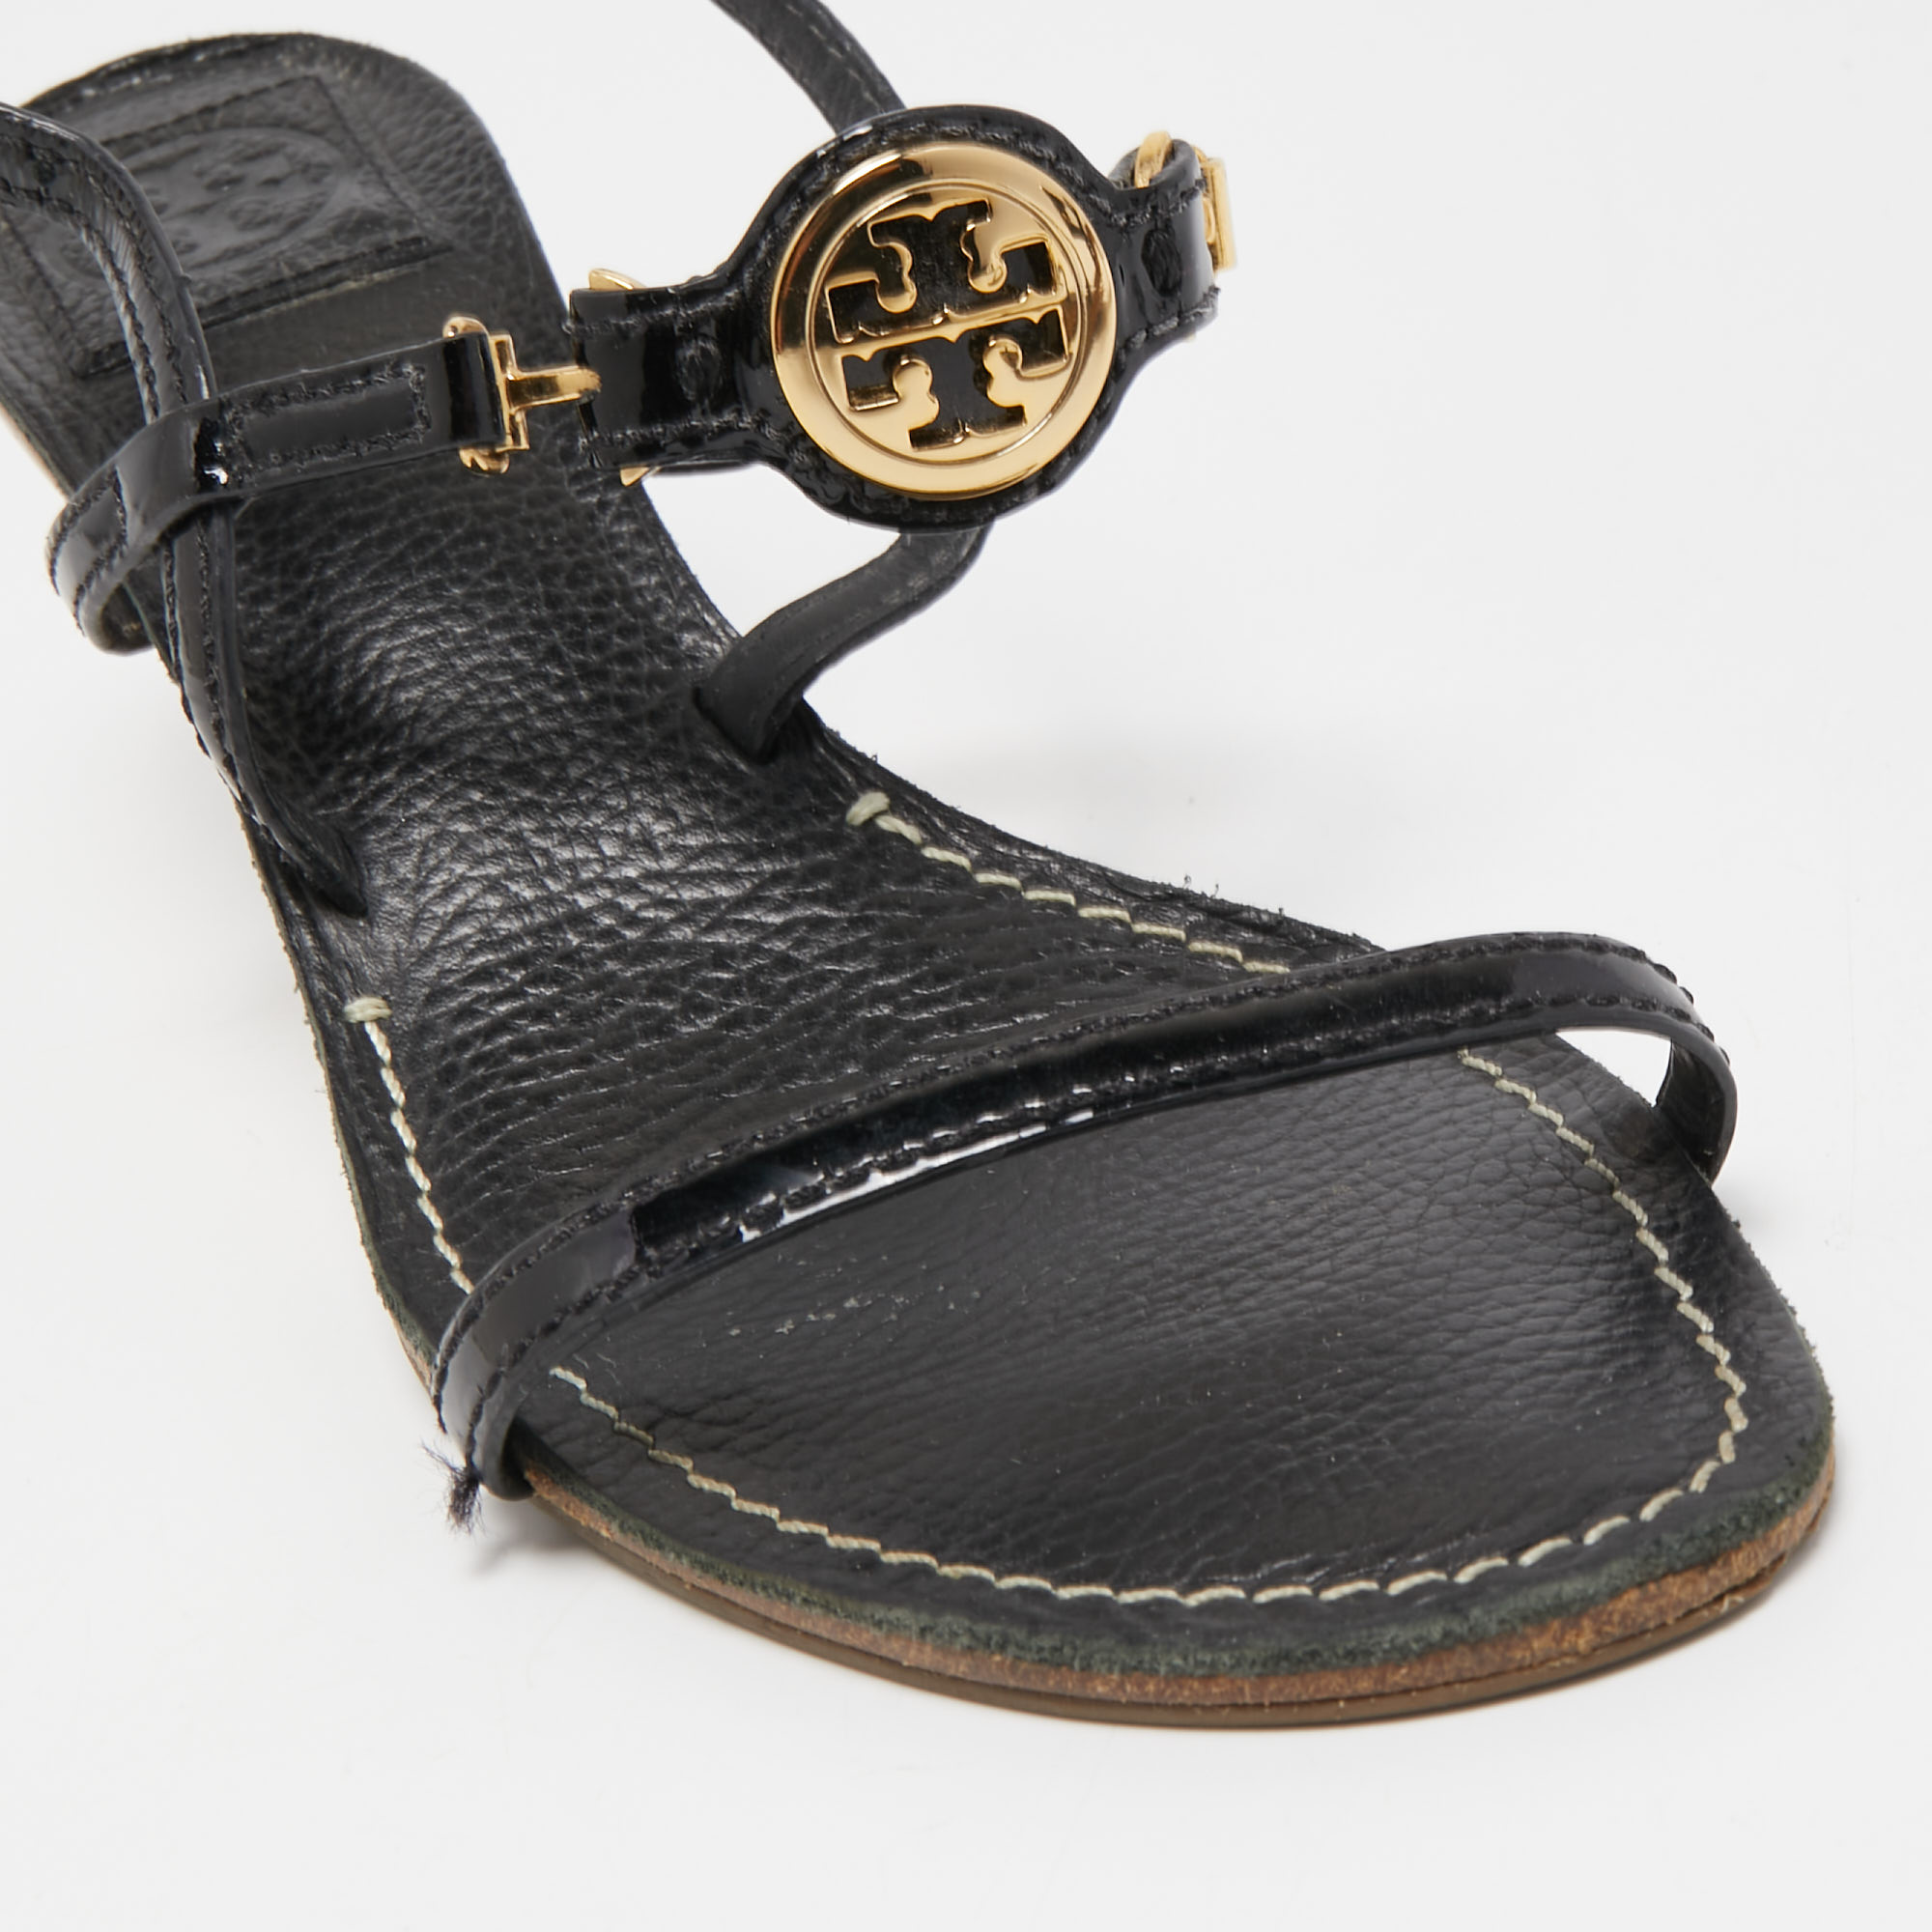 Tory Burch Black Patent And Leather Ankle Strap Sandals Size 39.5